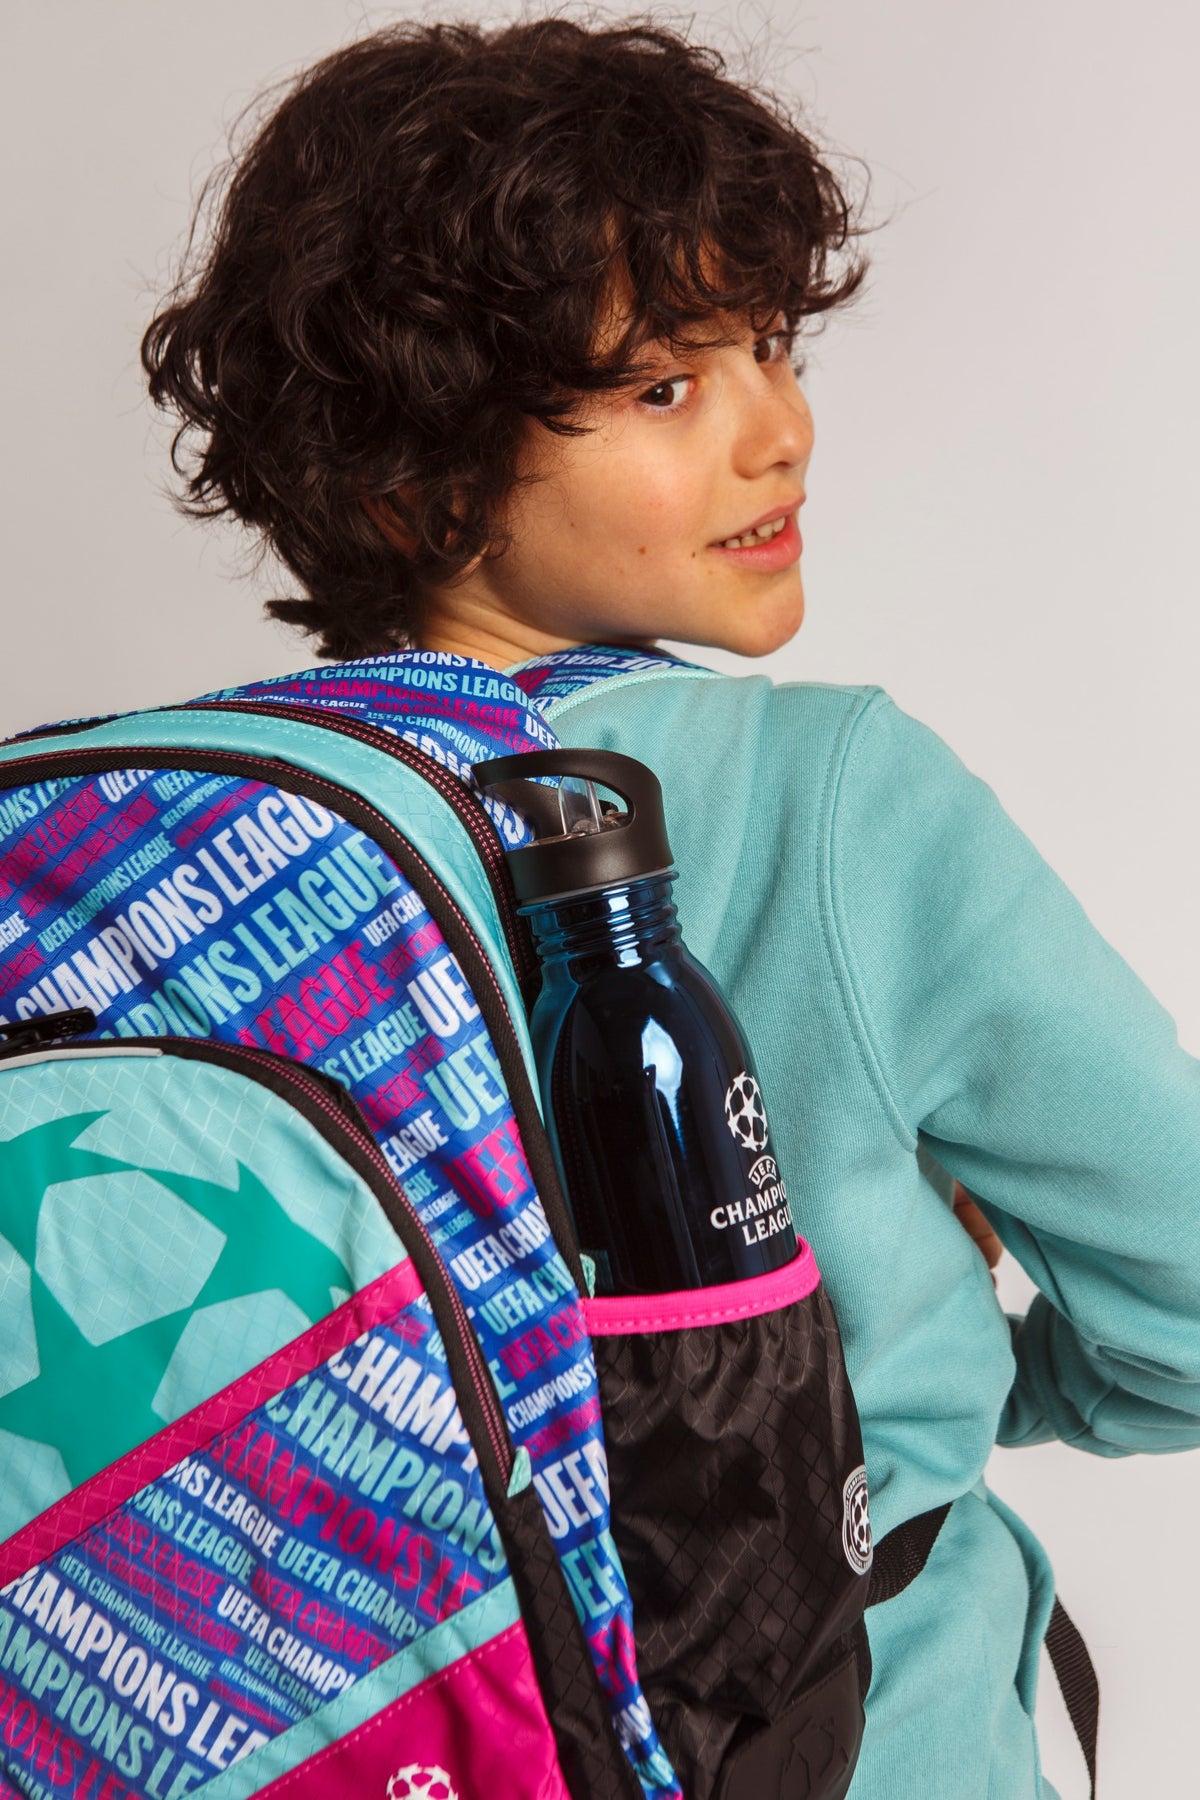 The Vibrant Backpack